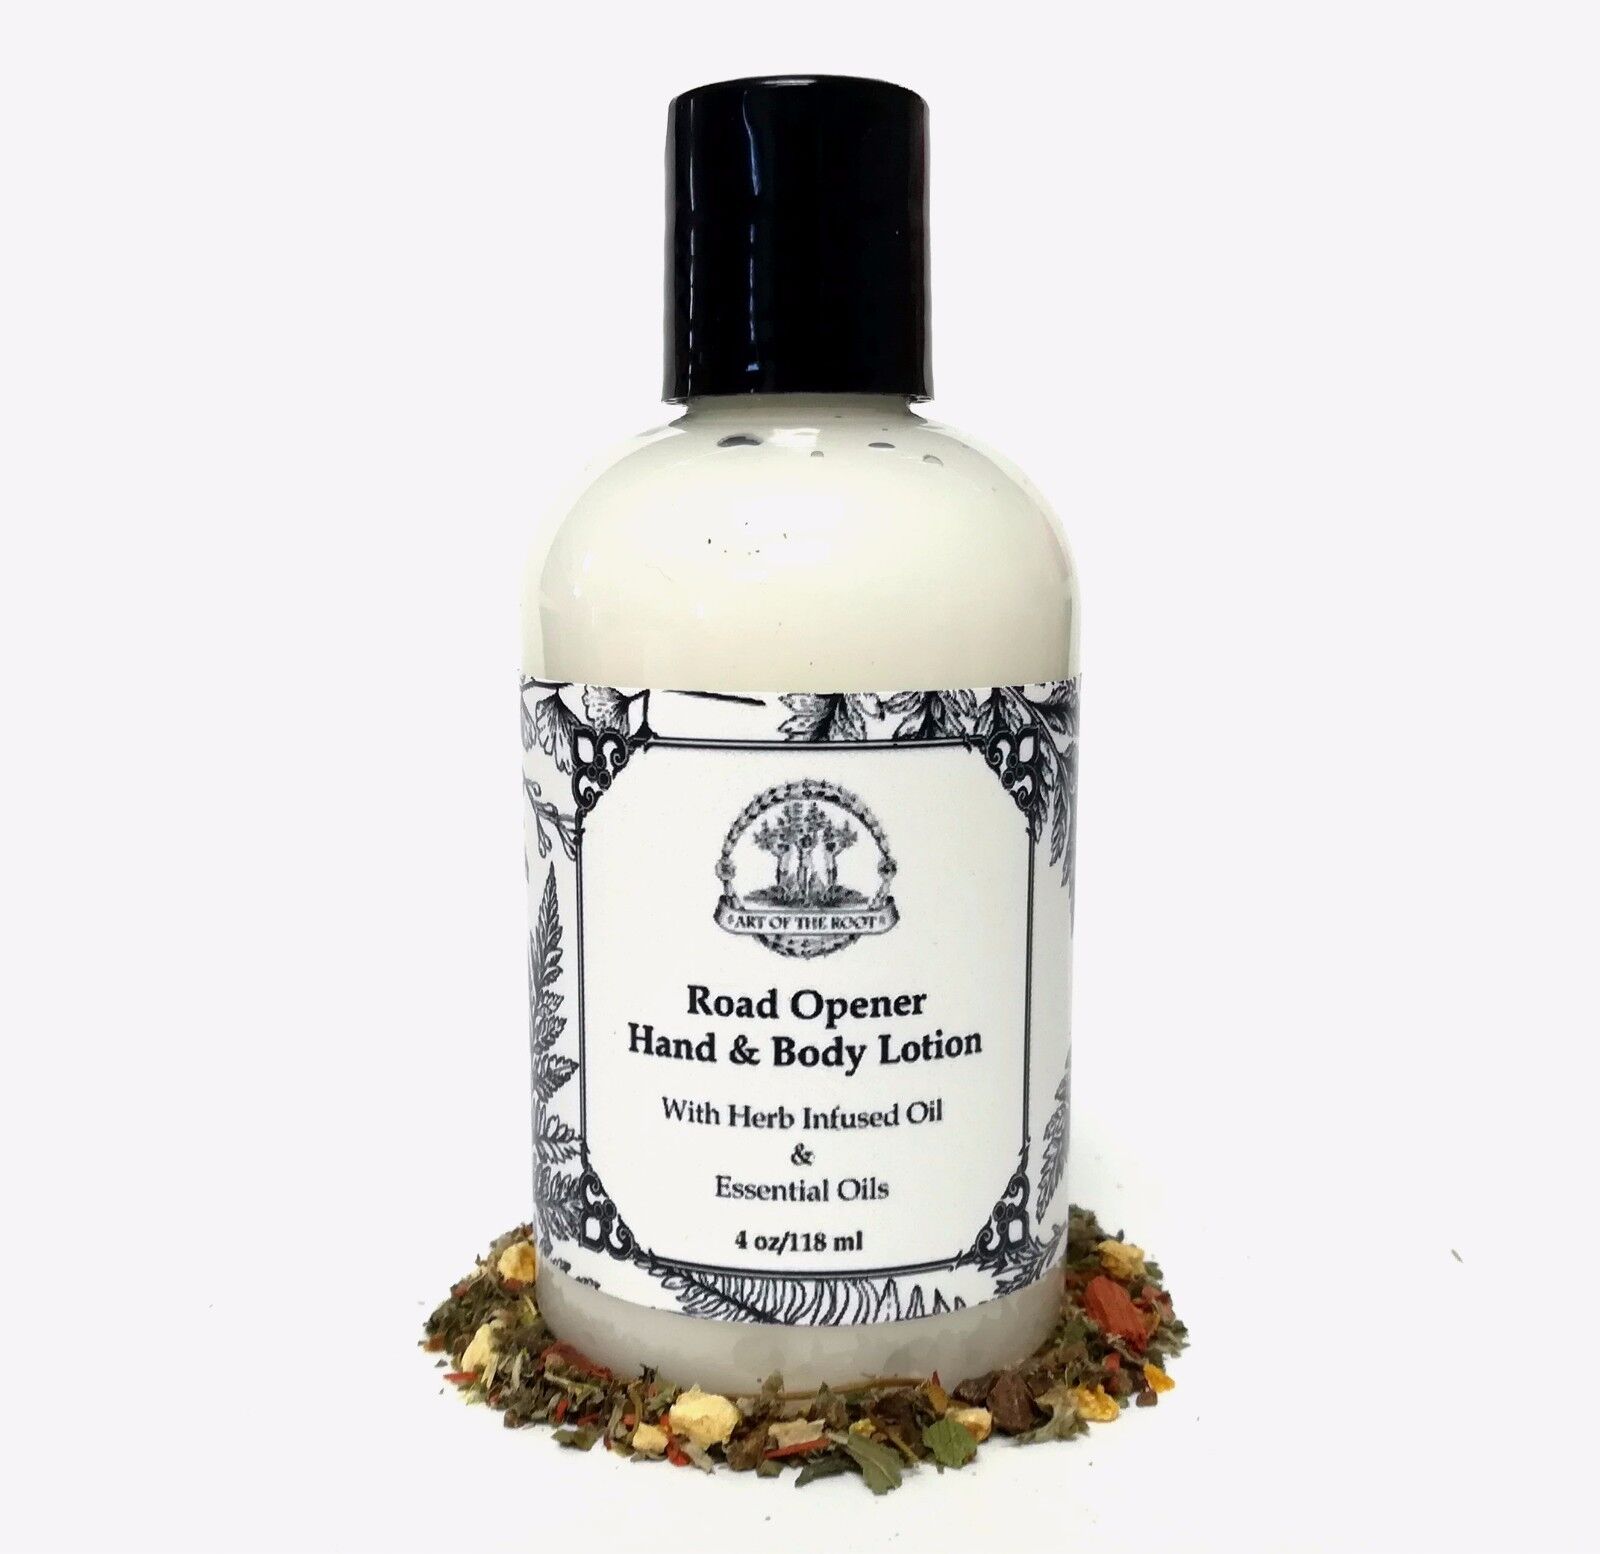 Road Opener Hand & Body Lotion for New Oppportunities Hoodoo Voodoo Wicca Pagan